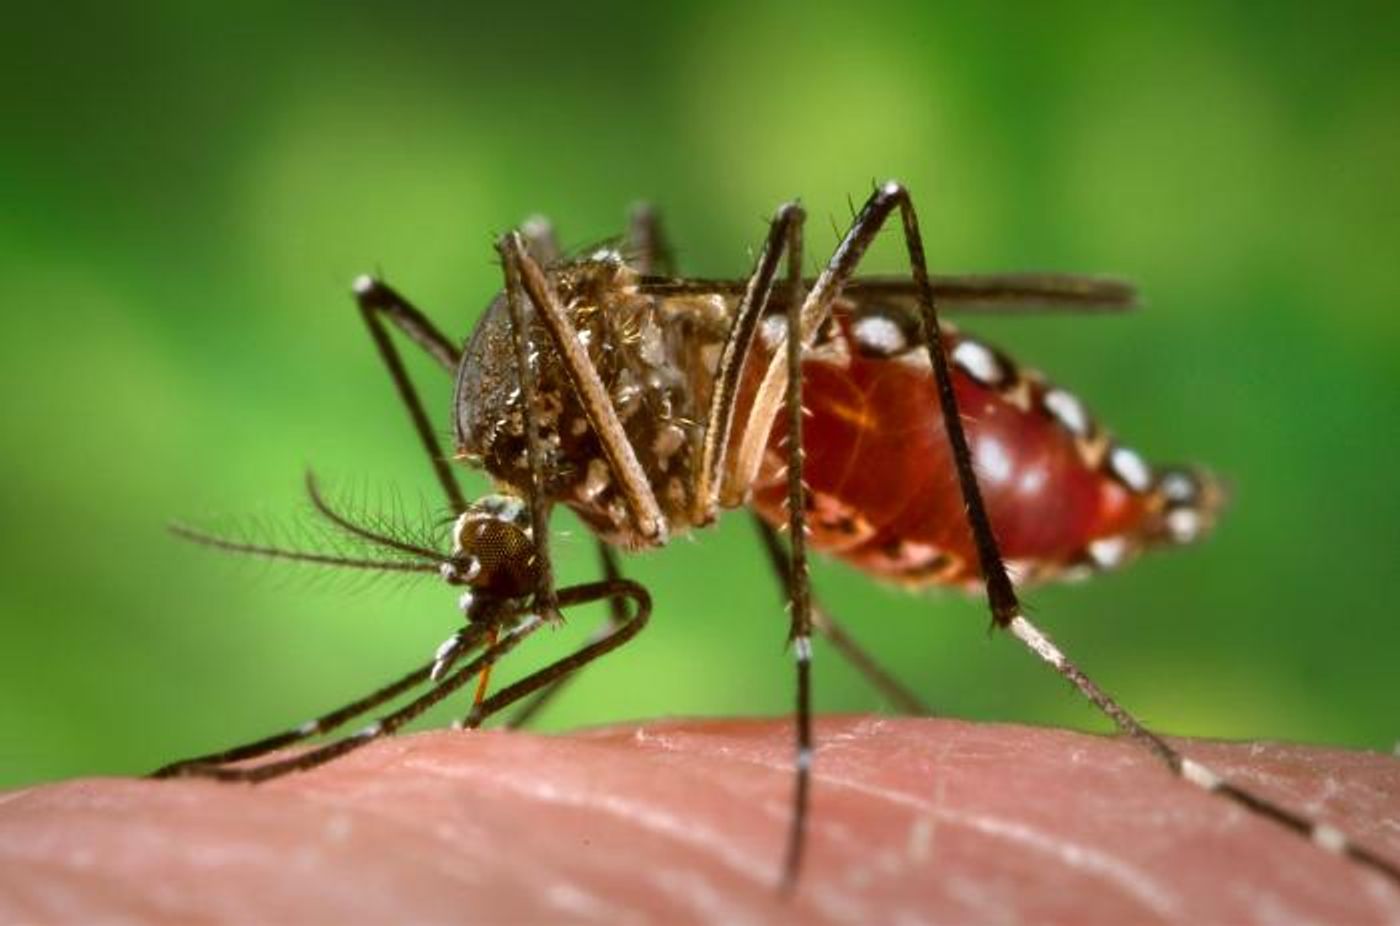 A female Aedes aegypti mosquito, the species responsible for spreading Zika virus, as she obtains a "blood meal." Source: CDC